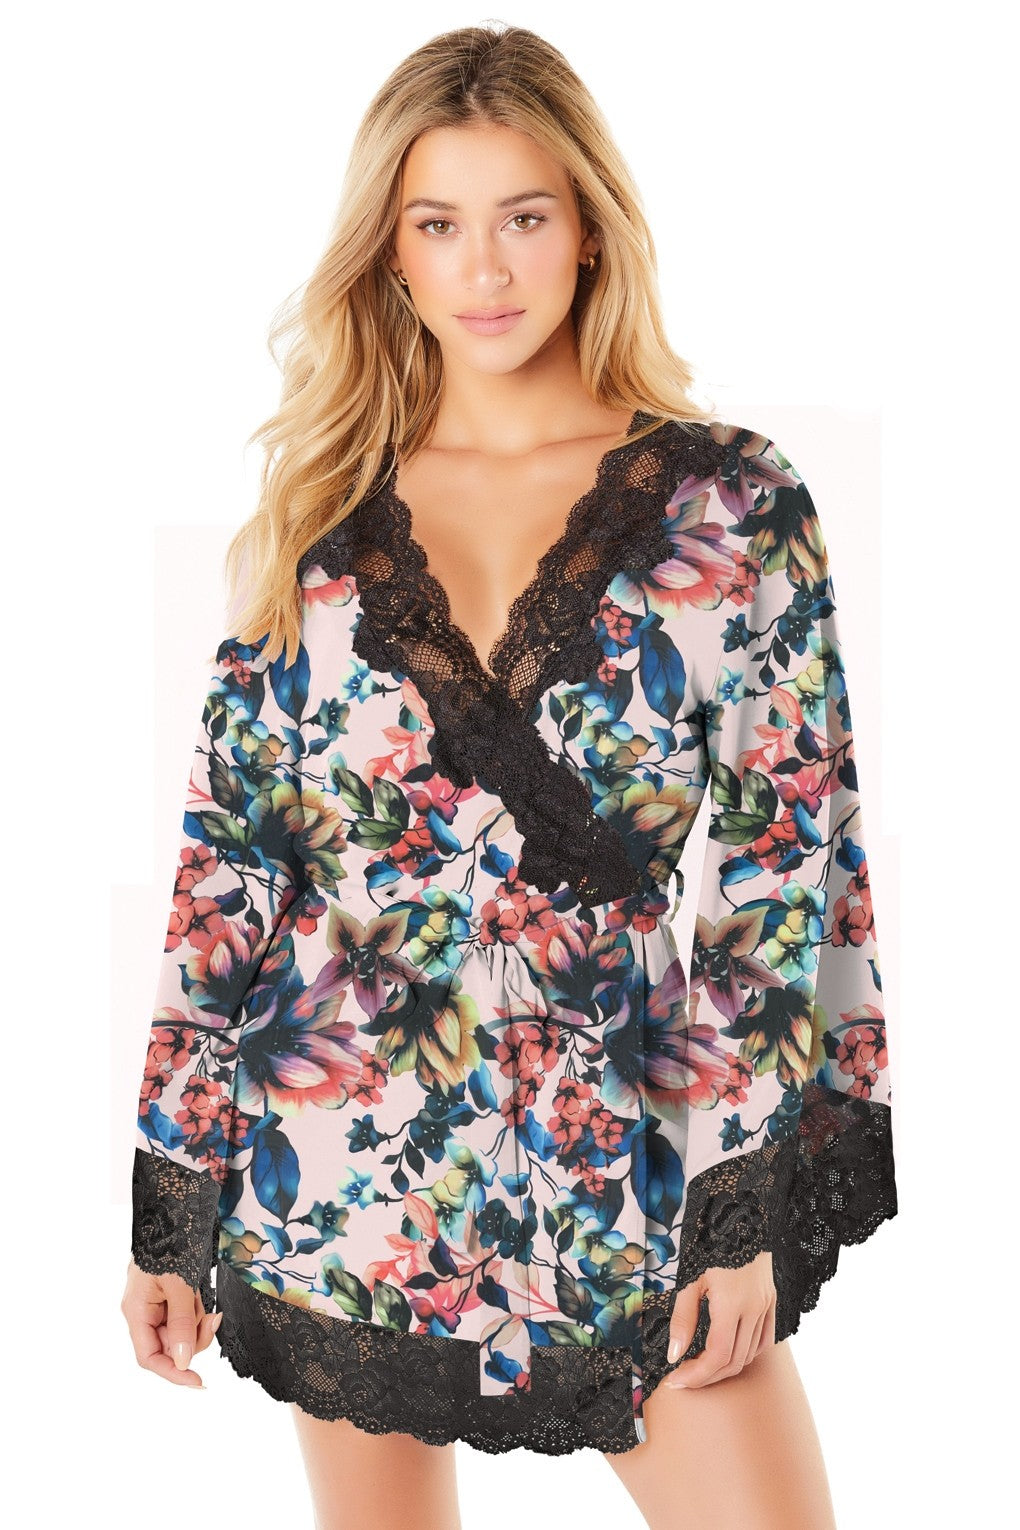 Oh La La Cheri: Butterfly Sleeve Robe with floral Lace Edge and Waist Tie [plus size]